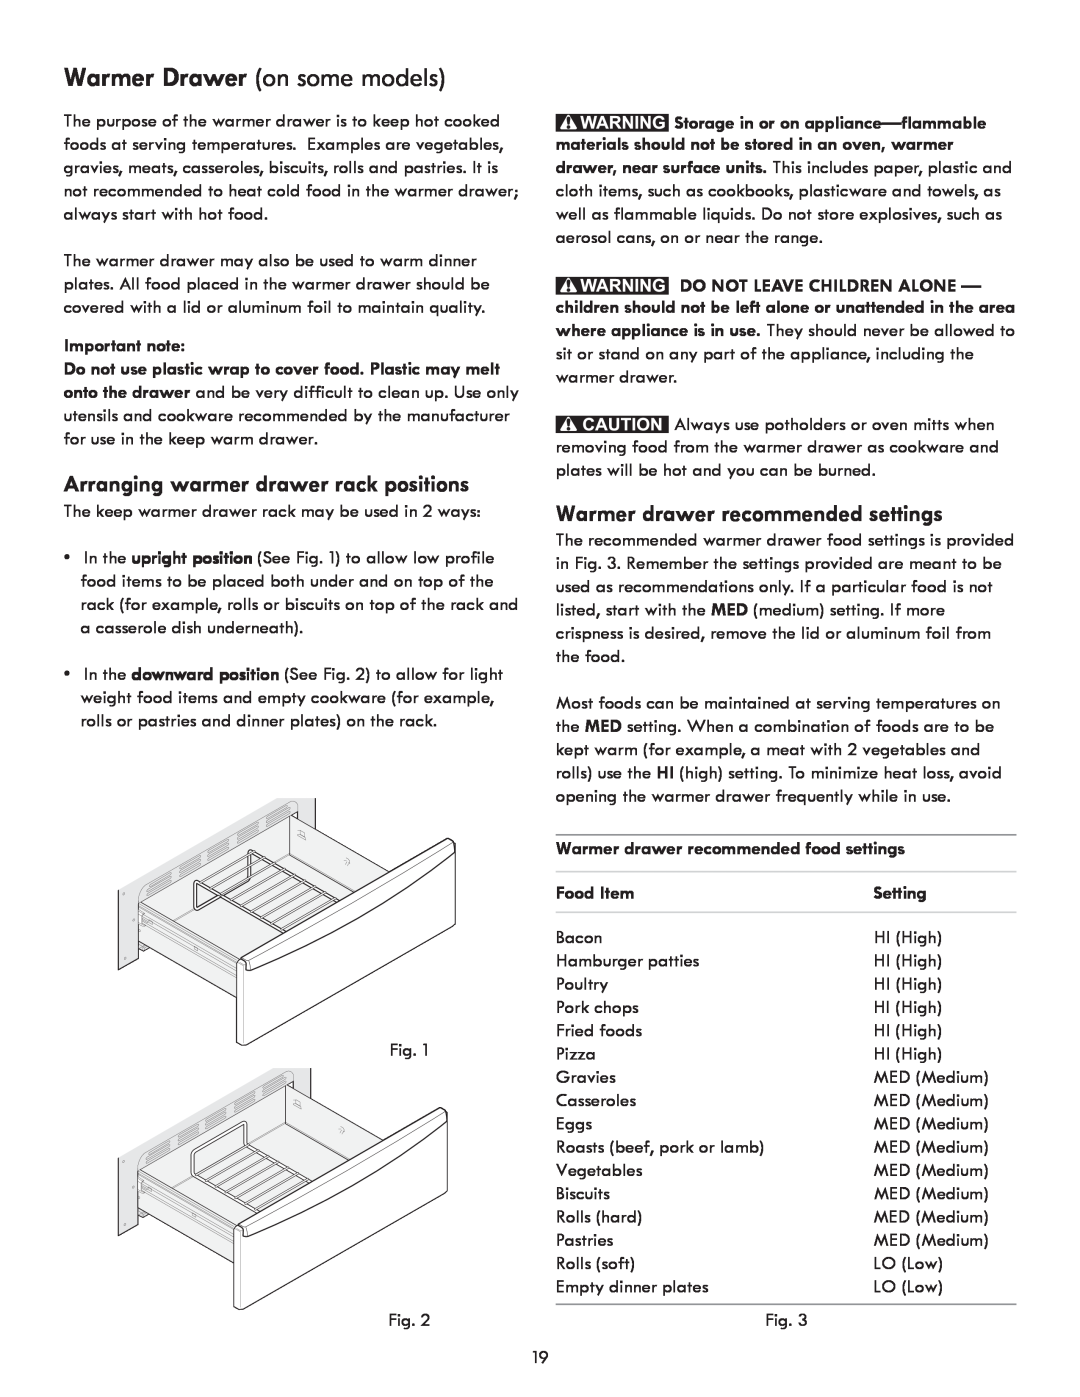 Kenmore 7290 Warmer Drawer on some models, Warmer drawer recommended settings, Arranging warmer drawer rack positions 